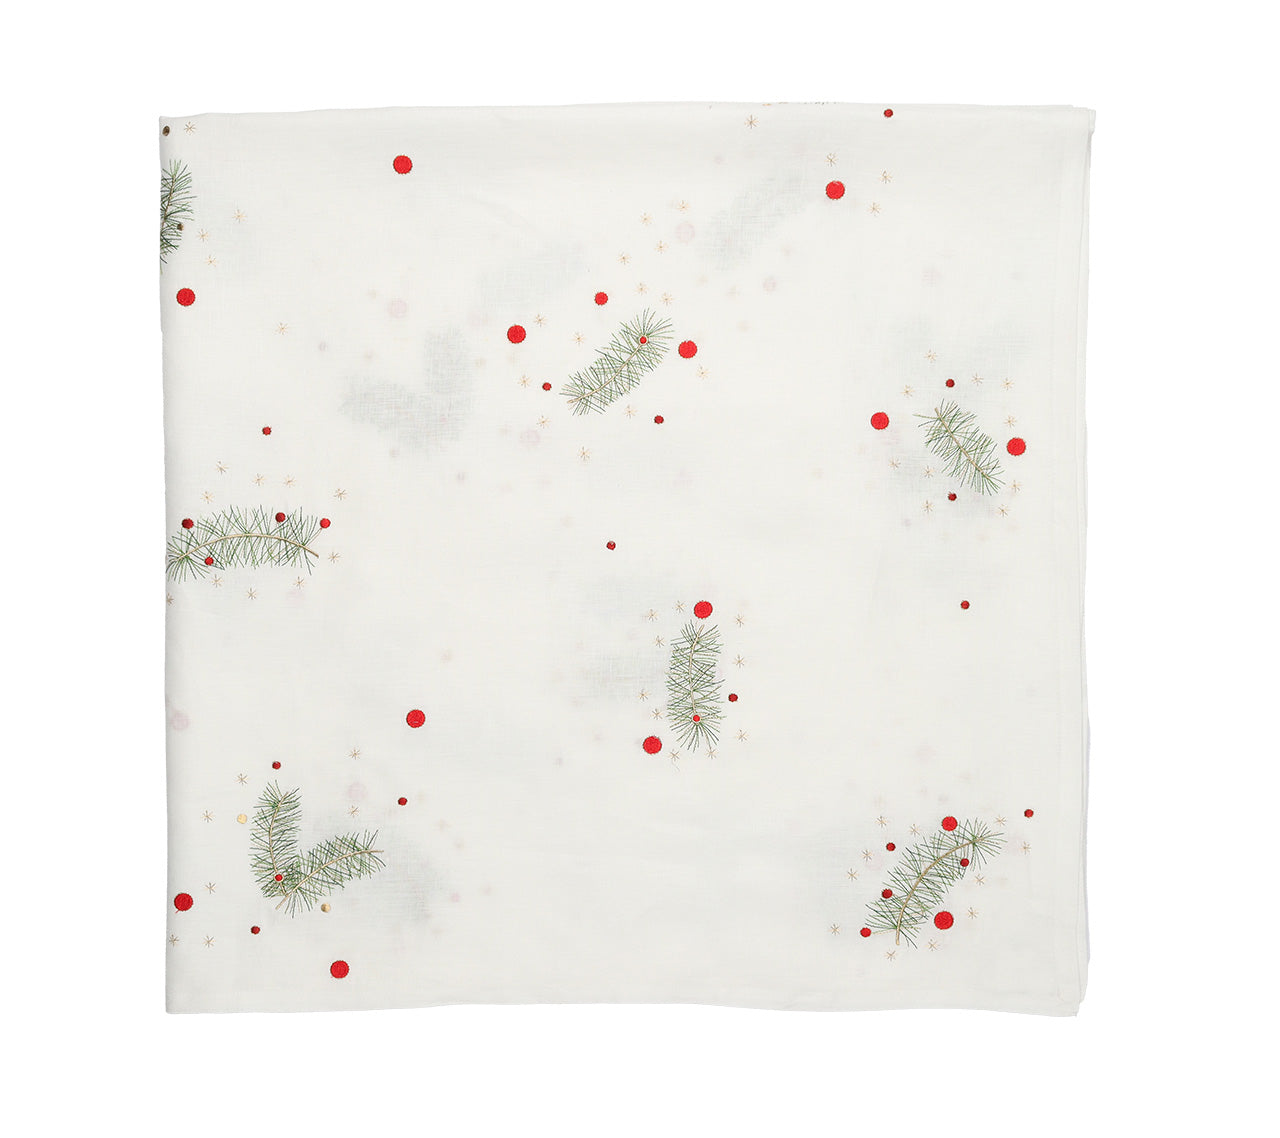 Evergreen Tablecloth in White, Red & Green